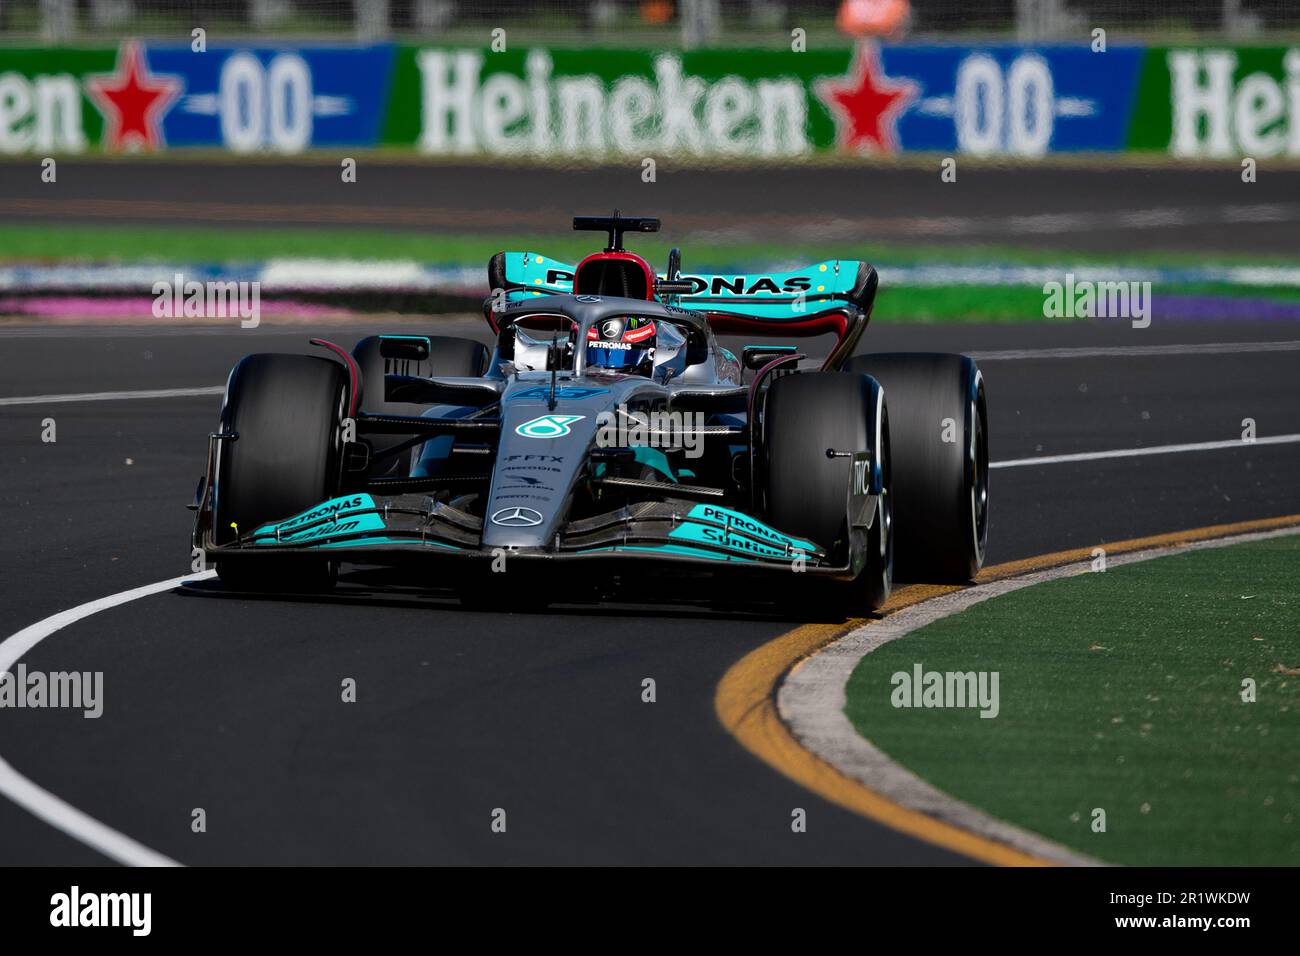 Melbourne, Australia, 8 April, 2022. George Russell (63) of Great Britain and Mercedes AMG Petronas Motorsport during the Australian Formula One Grand Prix at Albert Park on April 08, 2022 in Melbourne, Australia.  Credit: Steven Markham/Speed Media/Alamy Live News Stock Photo